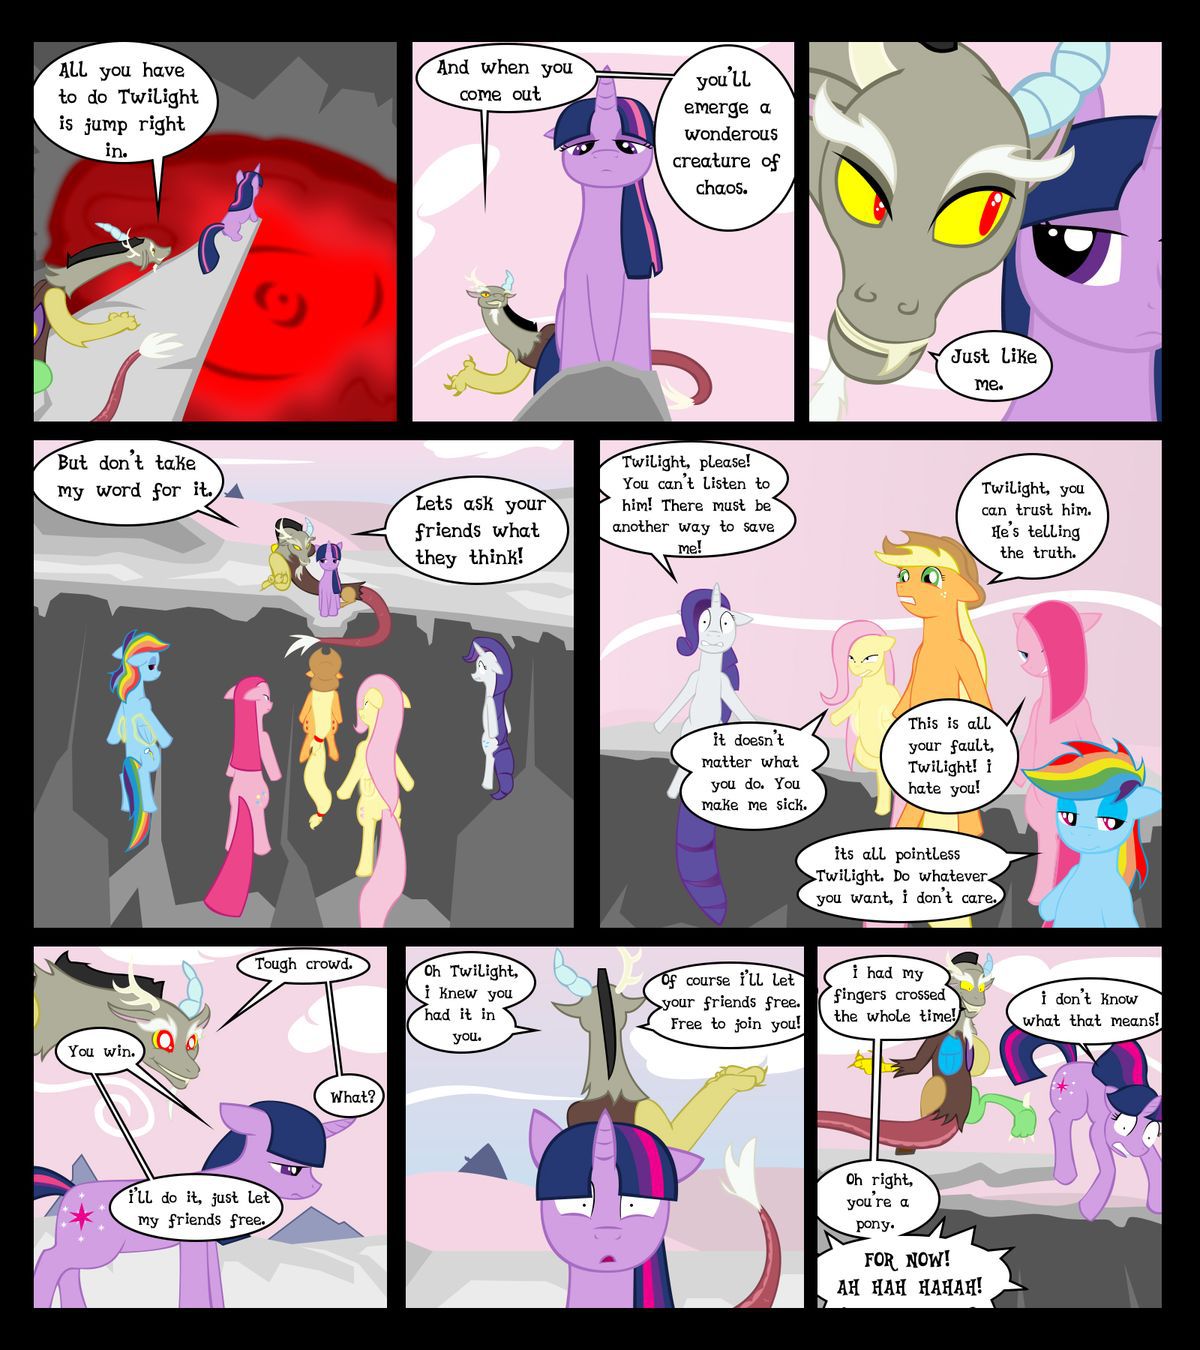 [GatesMcCloud] Cutie Mark Crusaders 10k: Chapter 3 - The Lost (My Little Pony: Friendship is Magic) [English] [Ongoing] 2